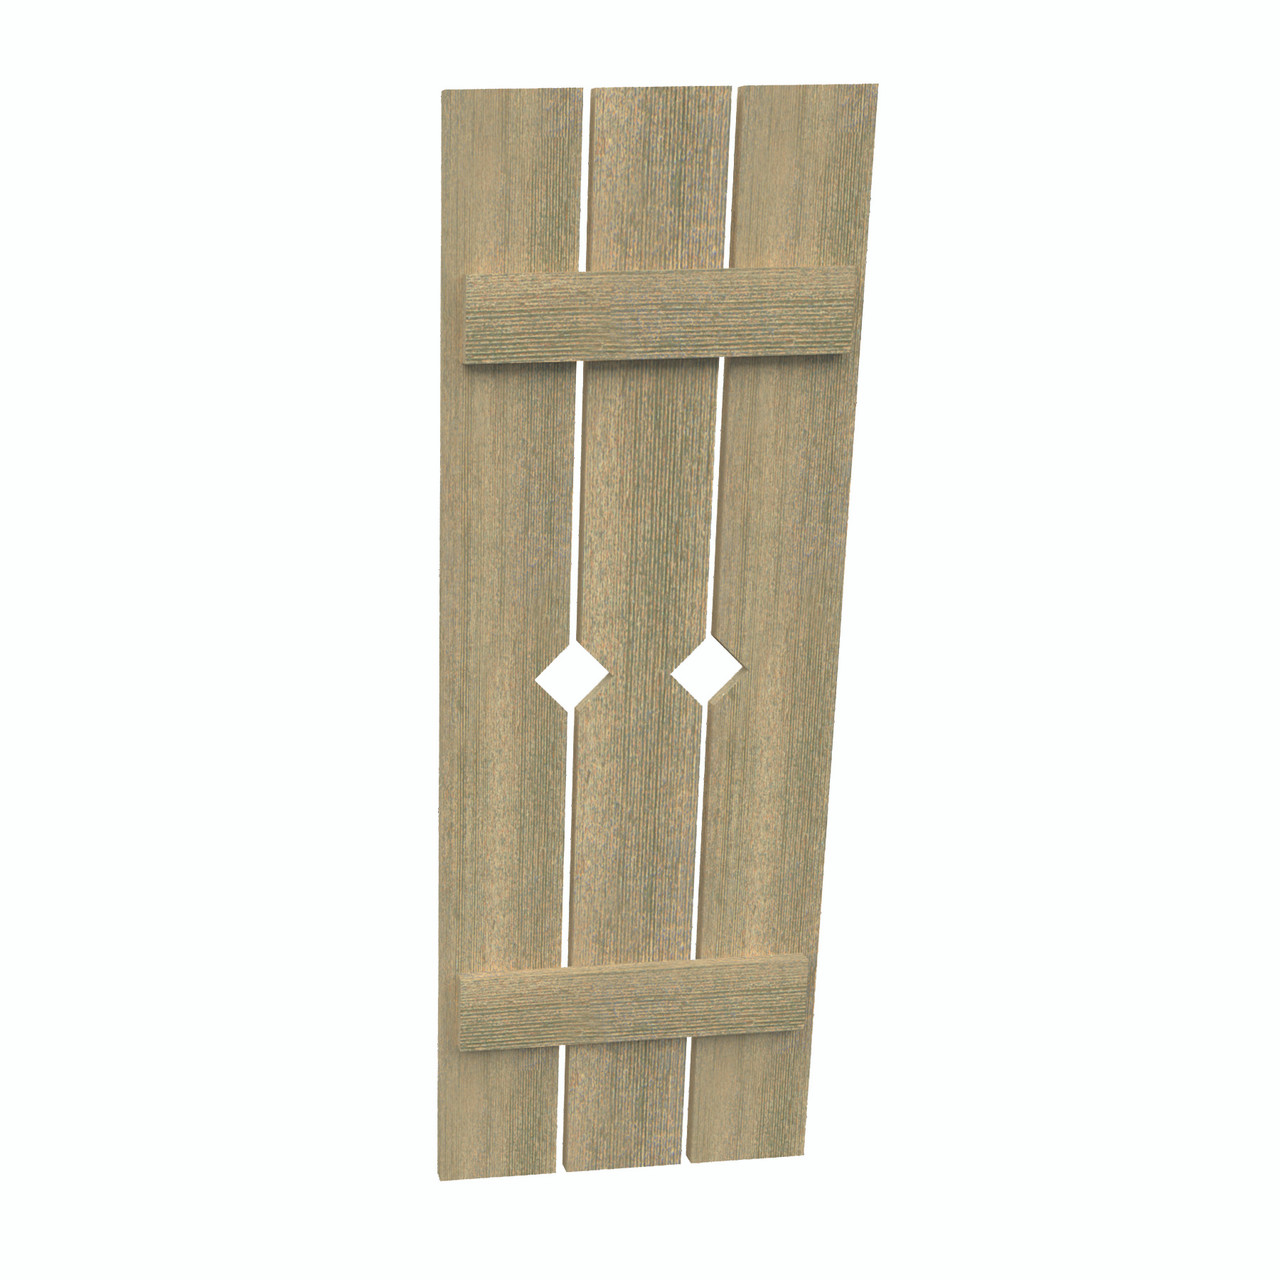 18 inch by 92 inch Plank Shutter with 3-Plank, Diamond